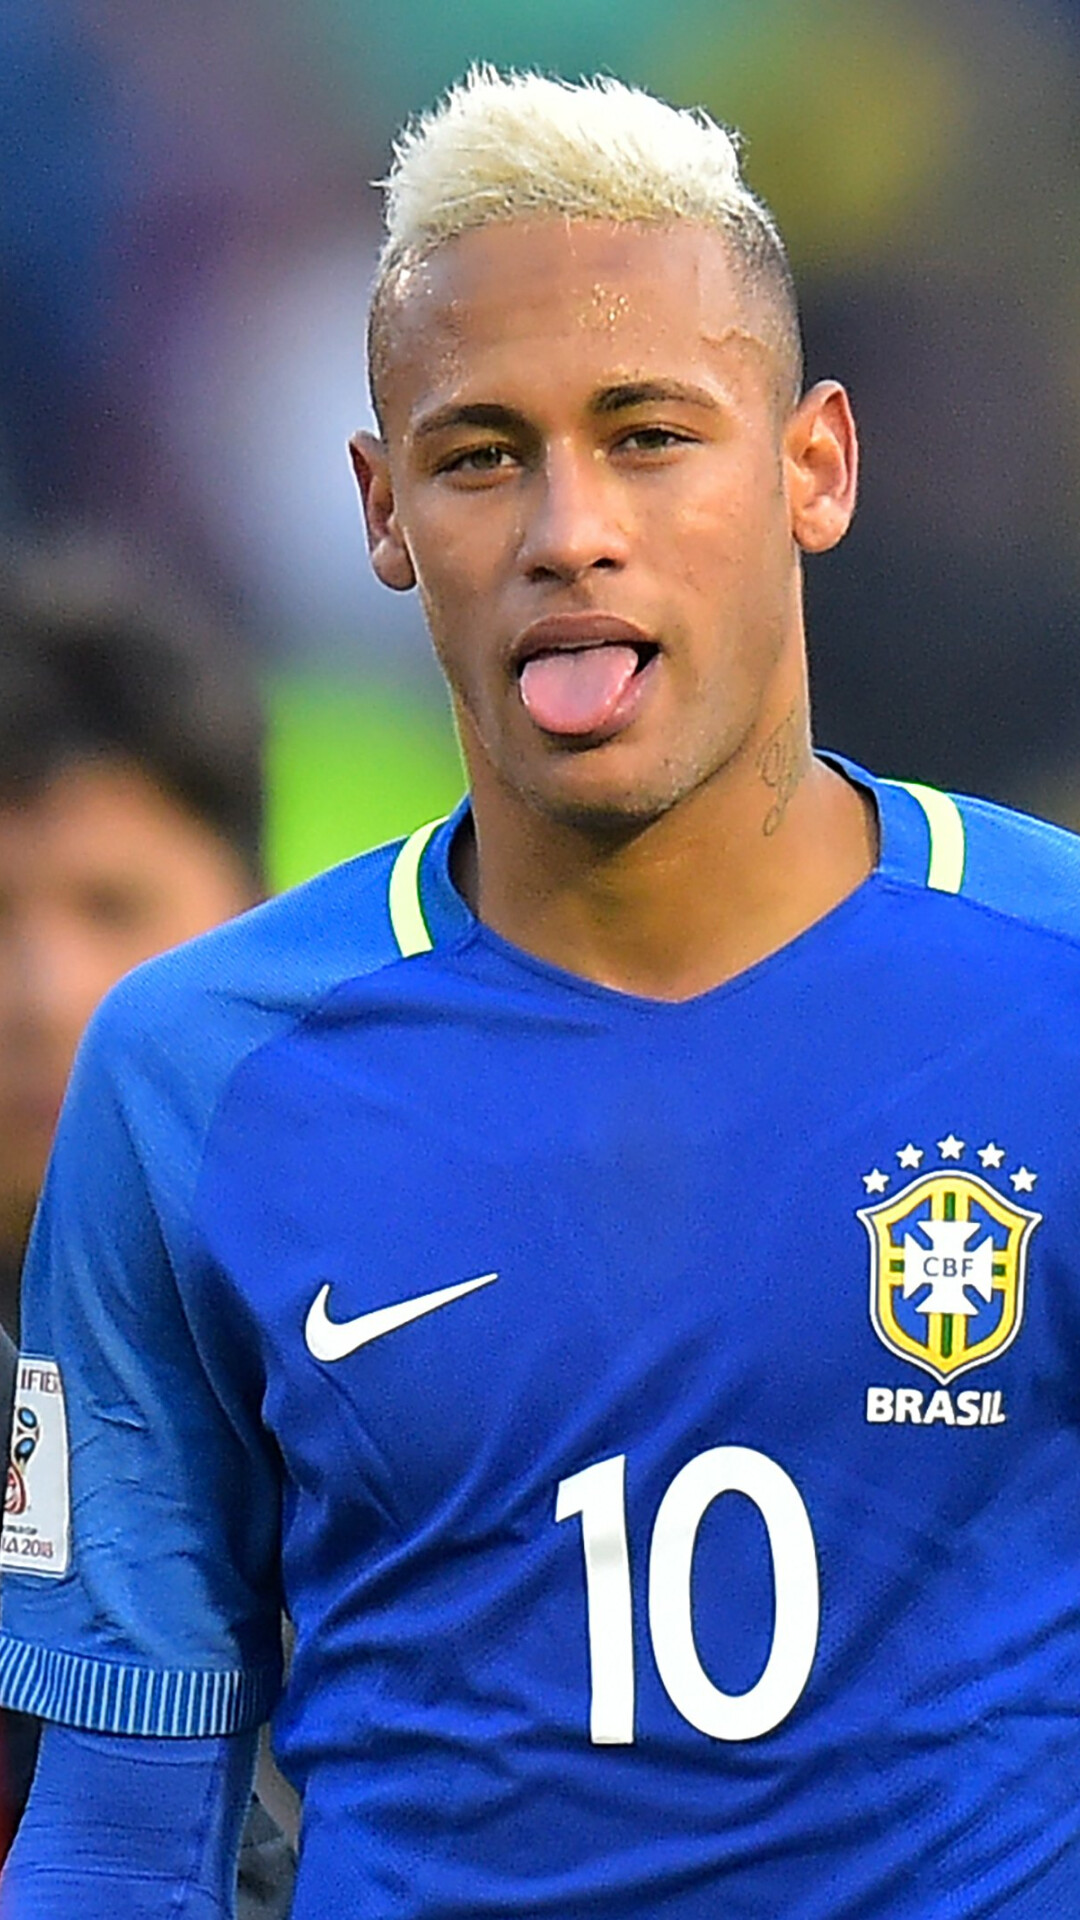 Neymar: The first player in European Cup and Champions League history to score 20 goals for two different clubs. 1080x1920 Full HD Background.